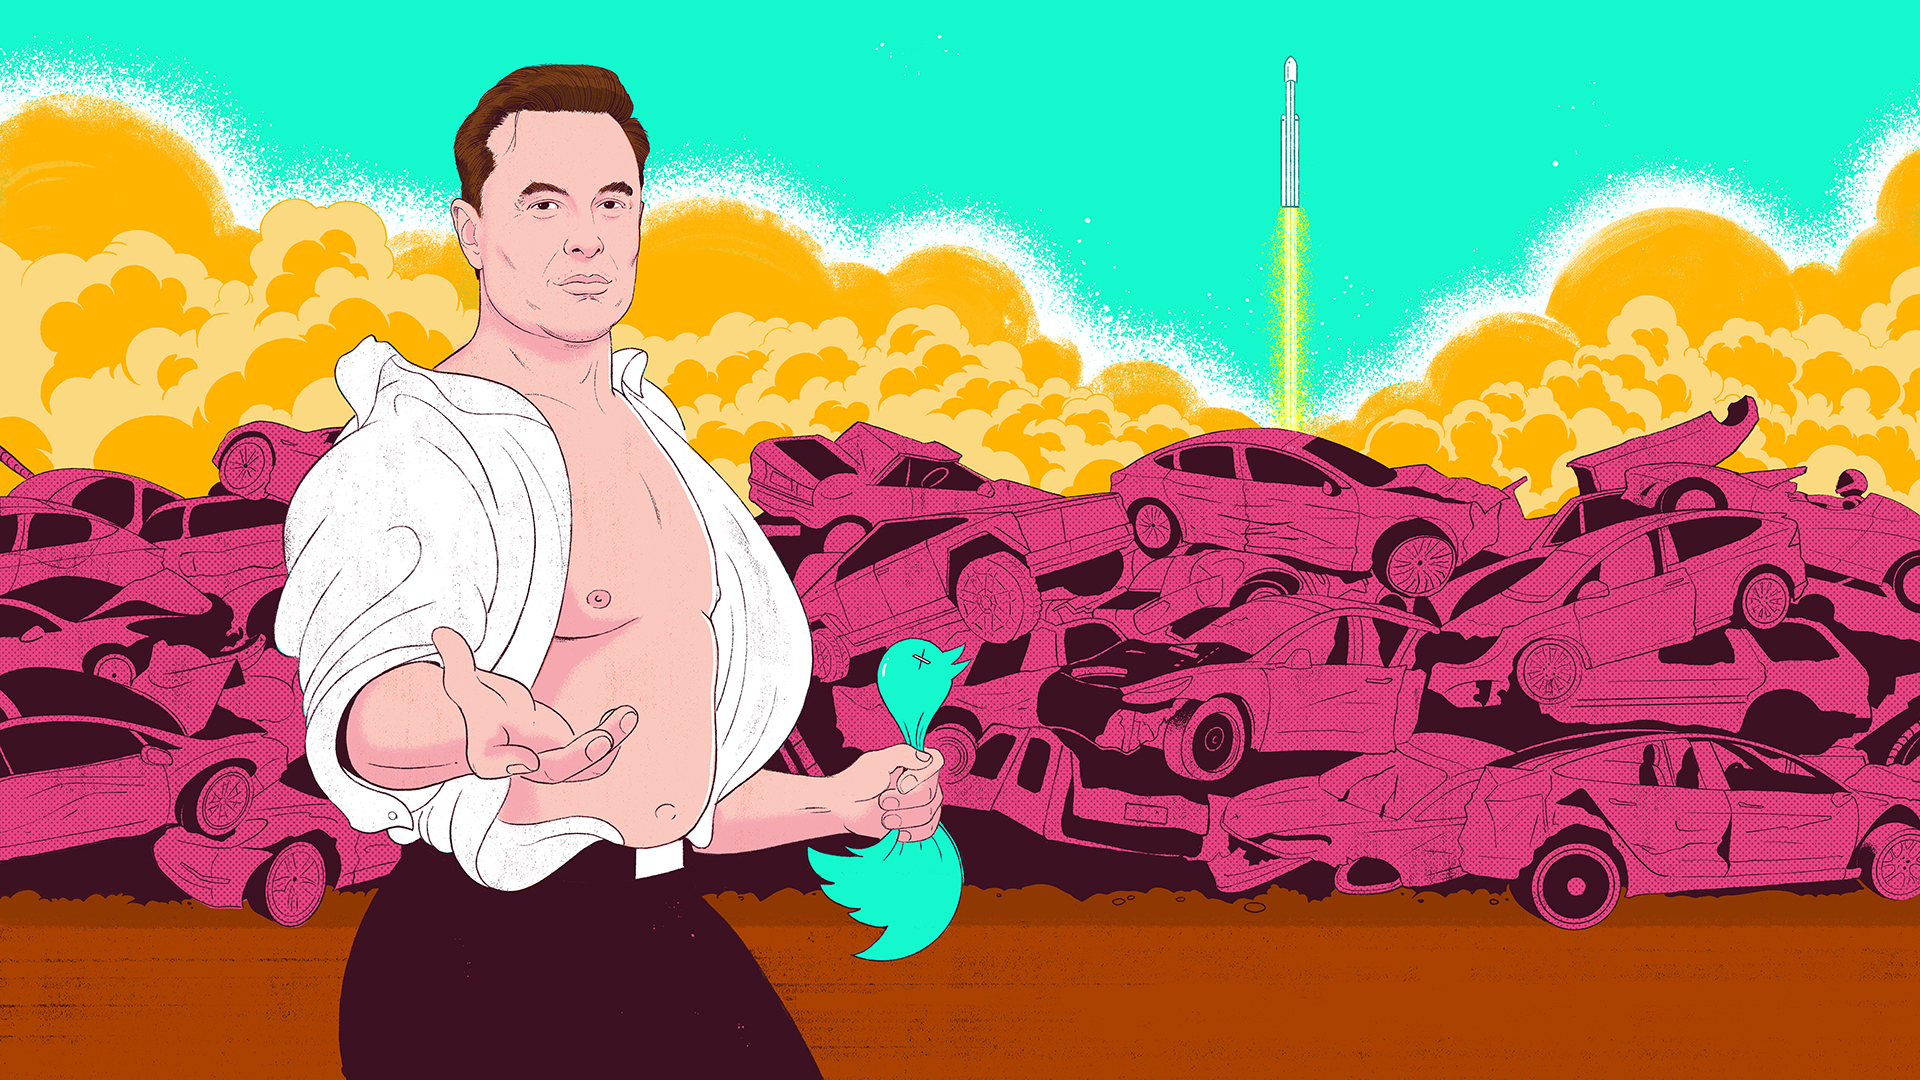 Elon Musk is standing with his shirt open and arm outstretched, all in a style referencing a romance novel cover. He’s squeezing a bird that looks like the twitter logo in his other hand. There’s a huge pile of crashed Teslas, a cloud of smoke and a rocket launching in the background.